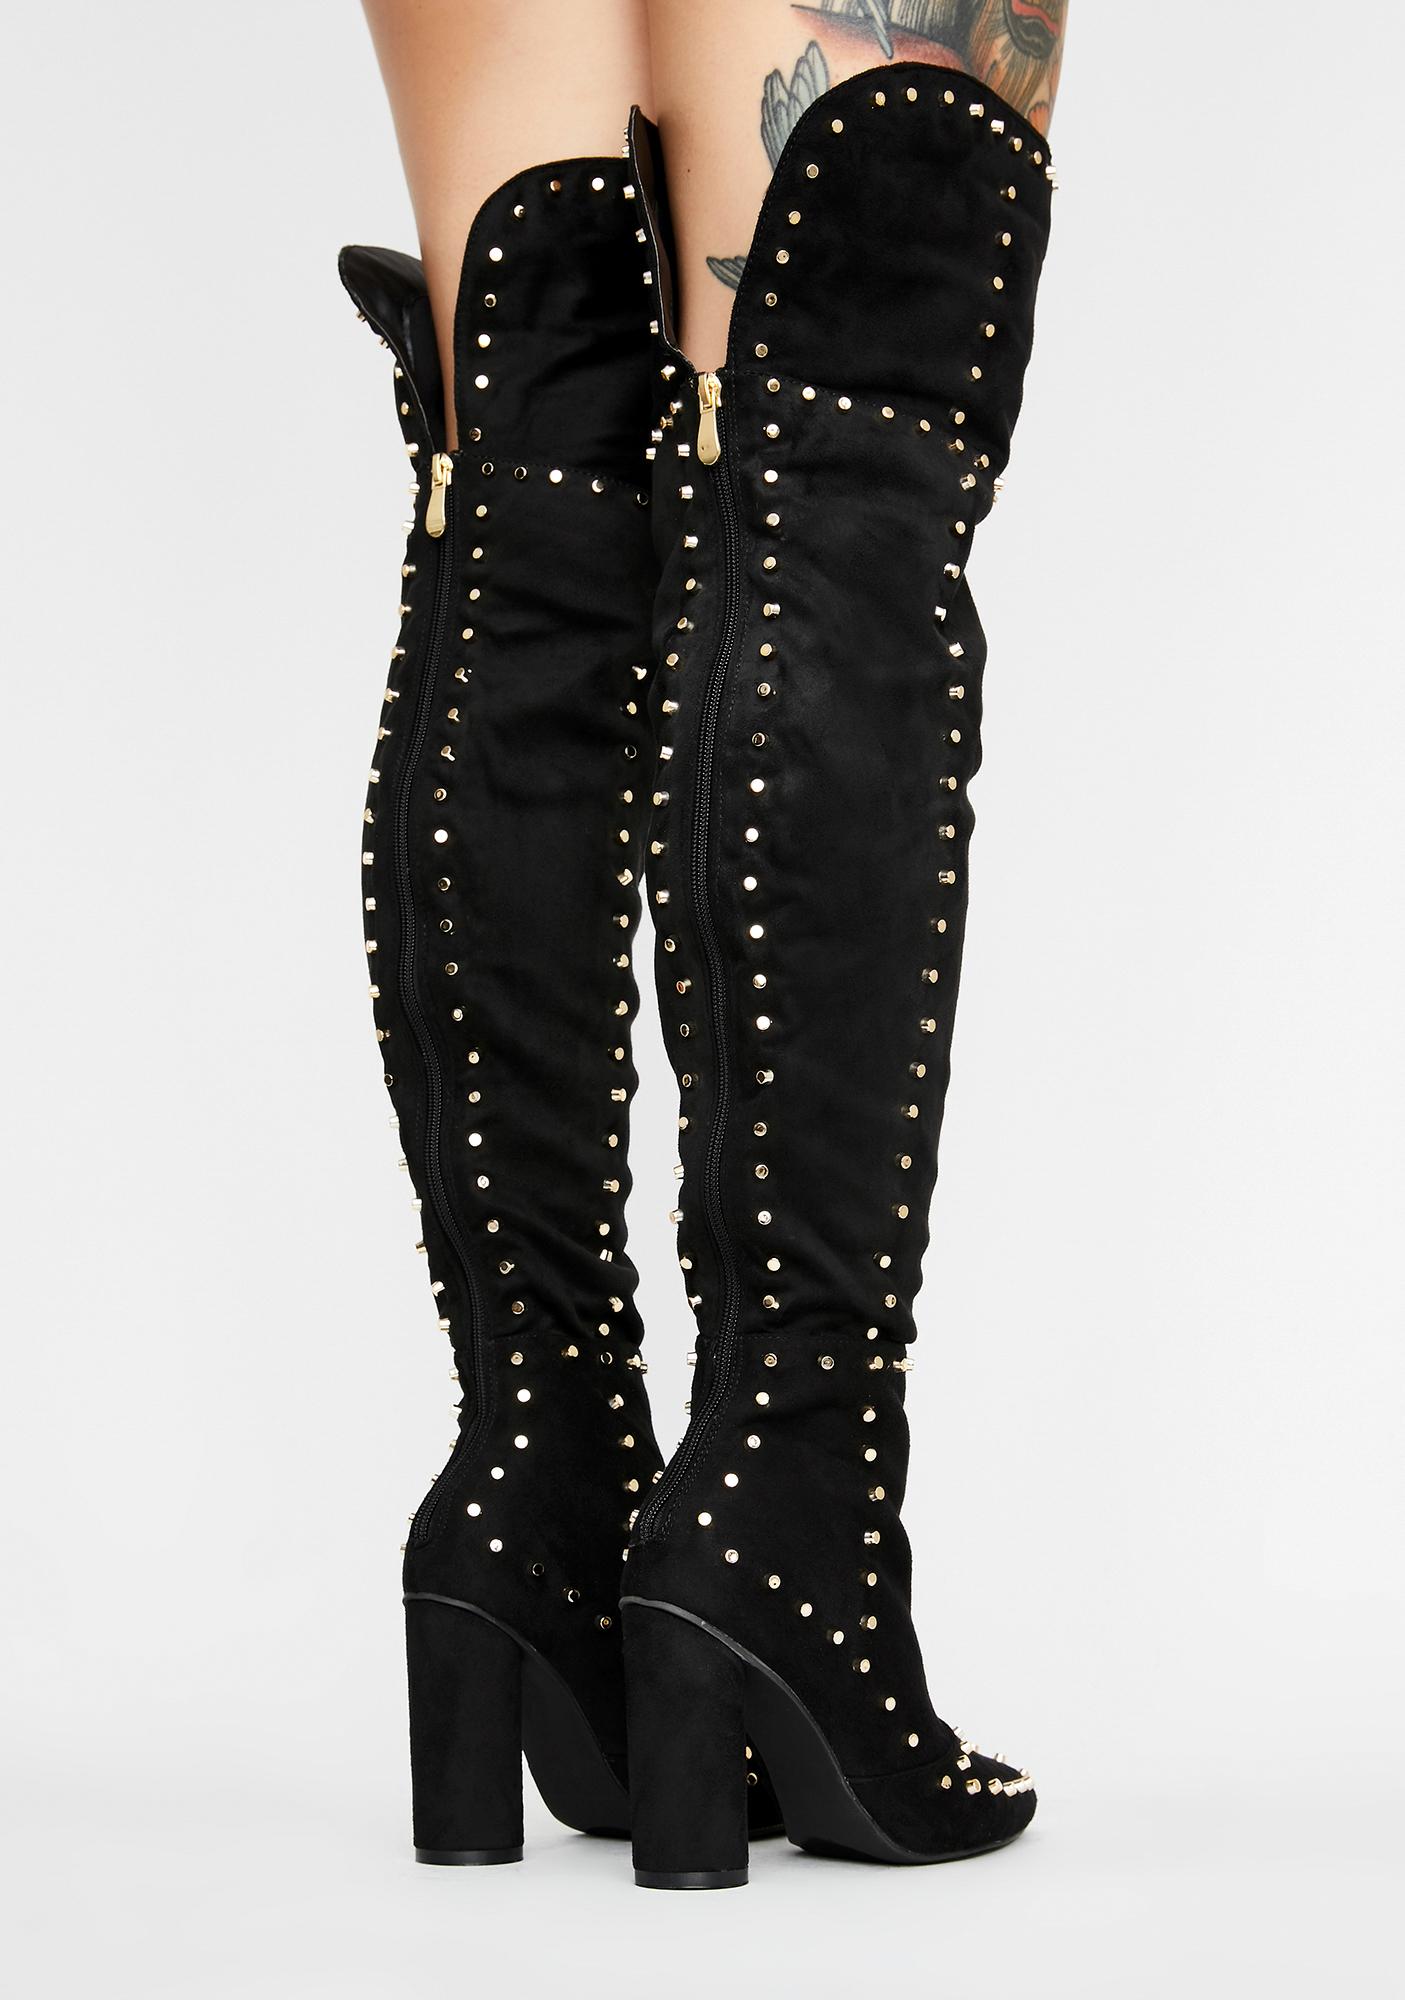 Studded Knee High Heeled Boots Faux Suede Pointed Toes Black | Dolls Kill